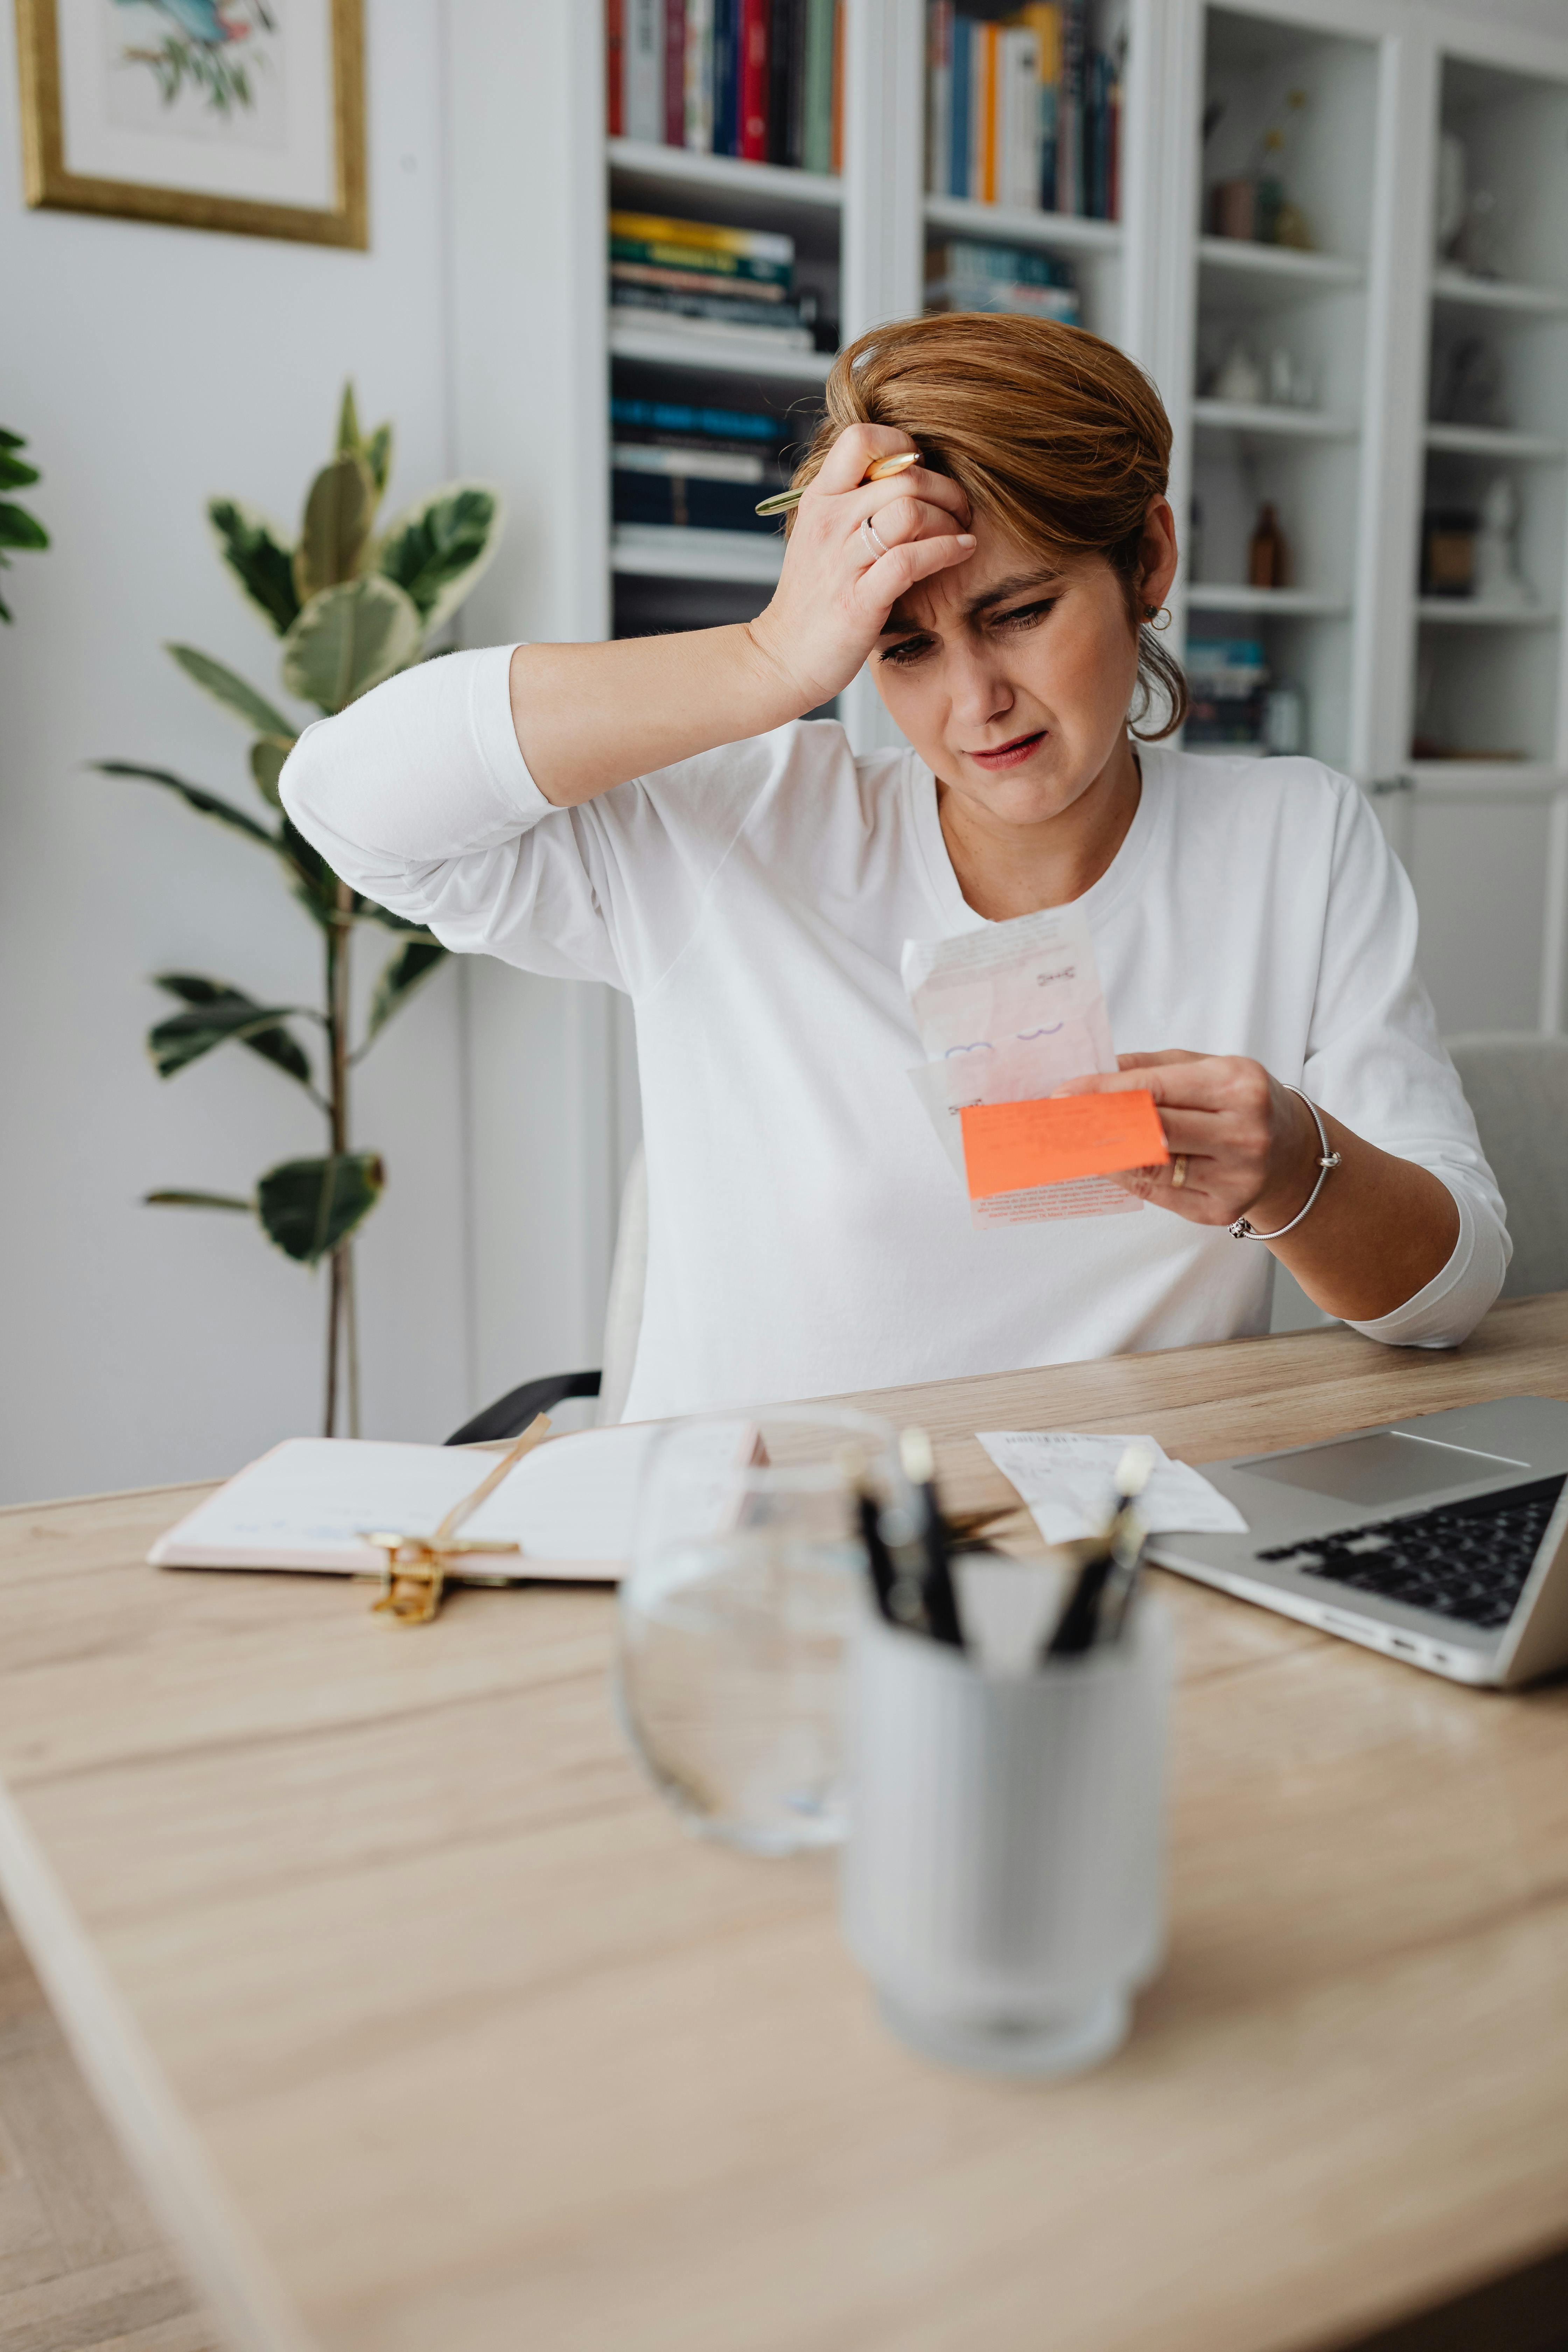 An upset woman looking at a receipt | Source: Pexels